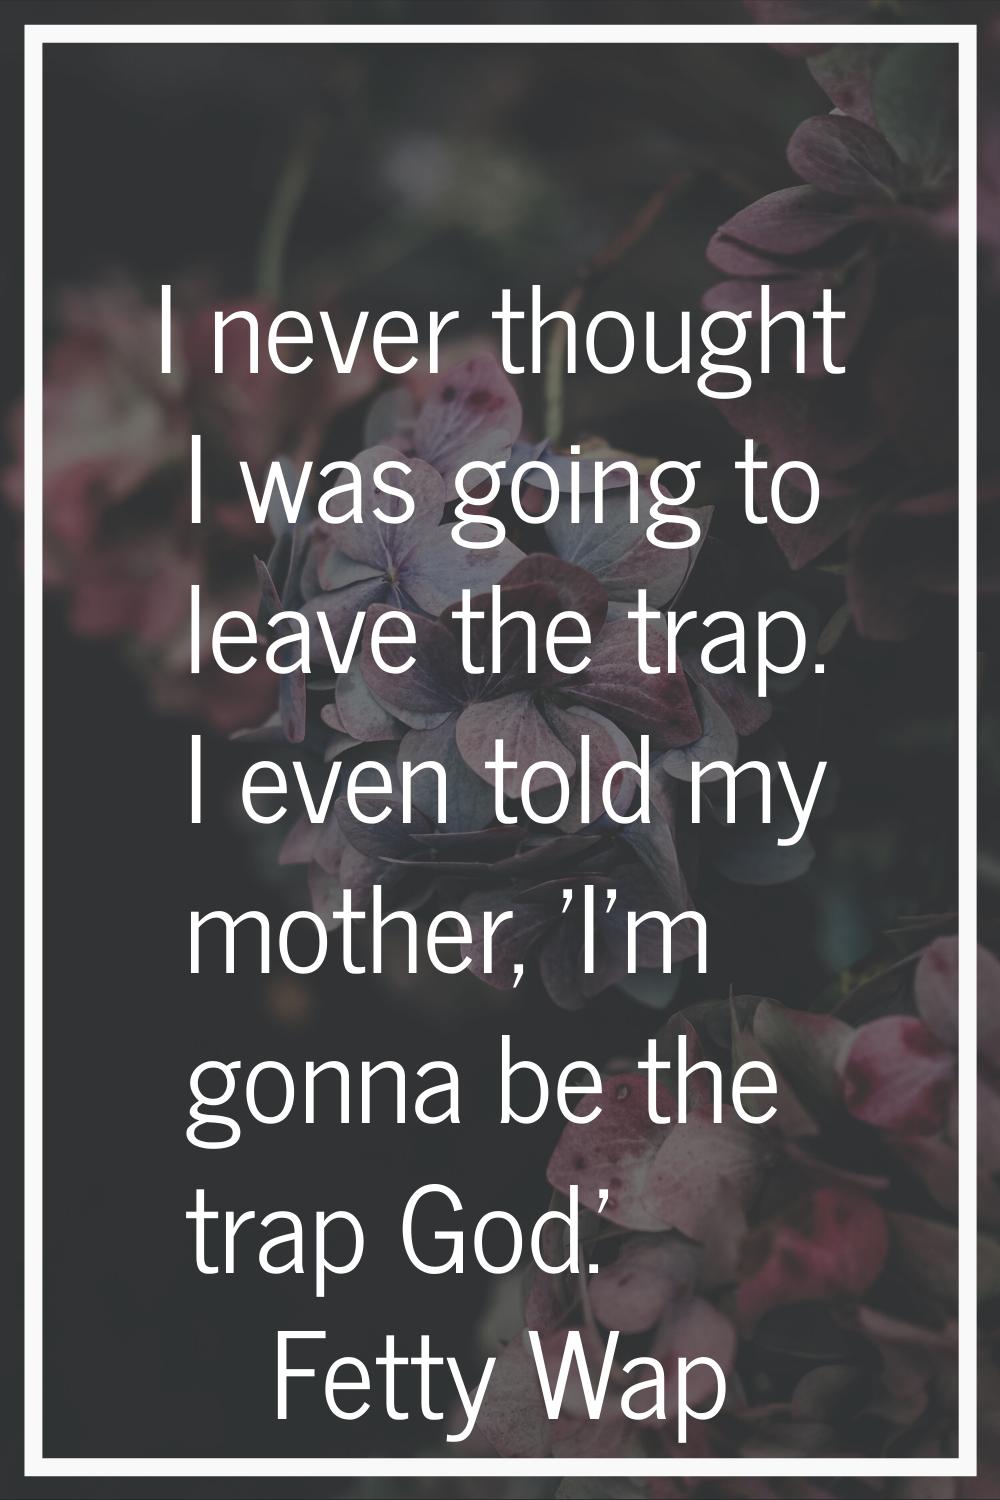 I never thought I was going to leave the trap. I even told my mother, 'I'm gonna be the trap God.'